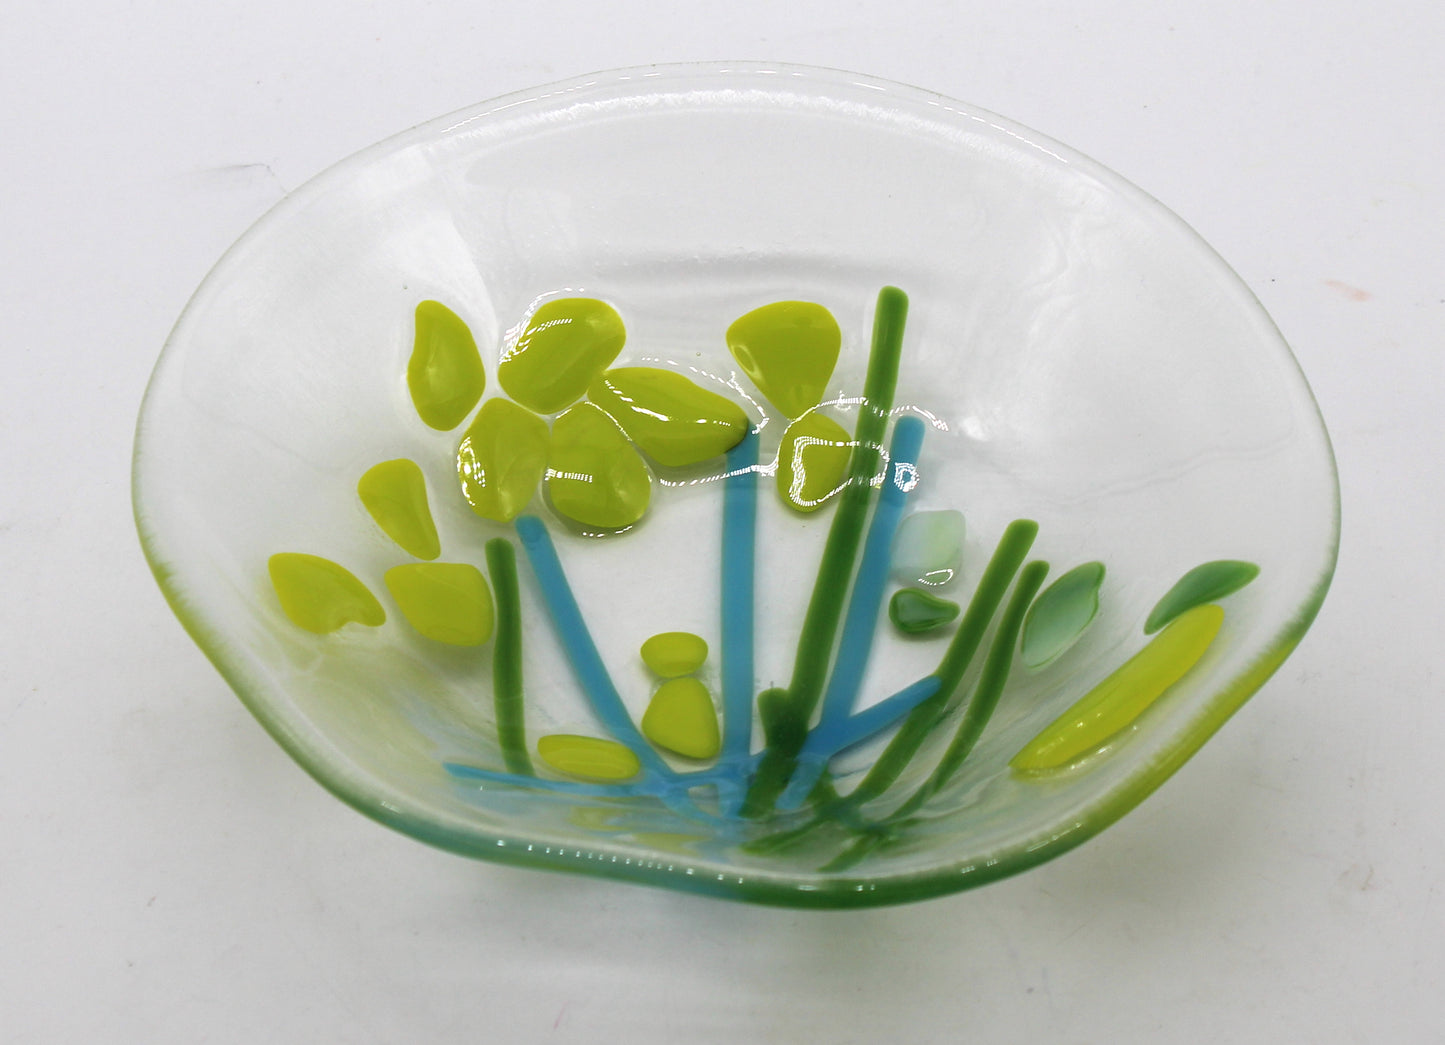 This is a fused glass piece that is clear with blue and green lines resembling stems, and lime green blotches resembling flowers.